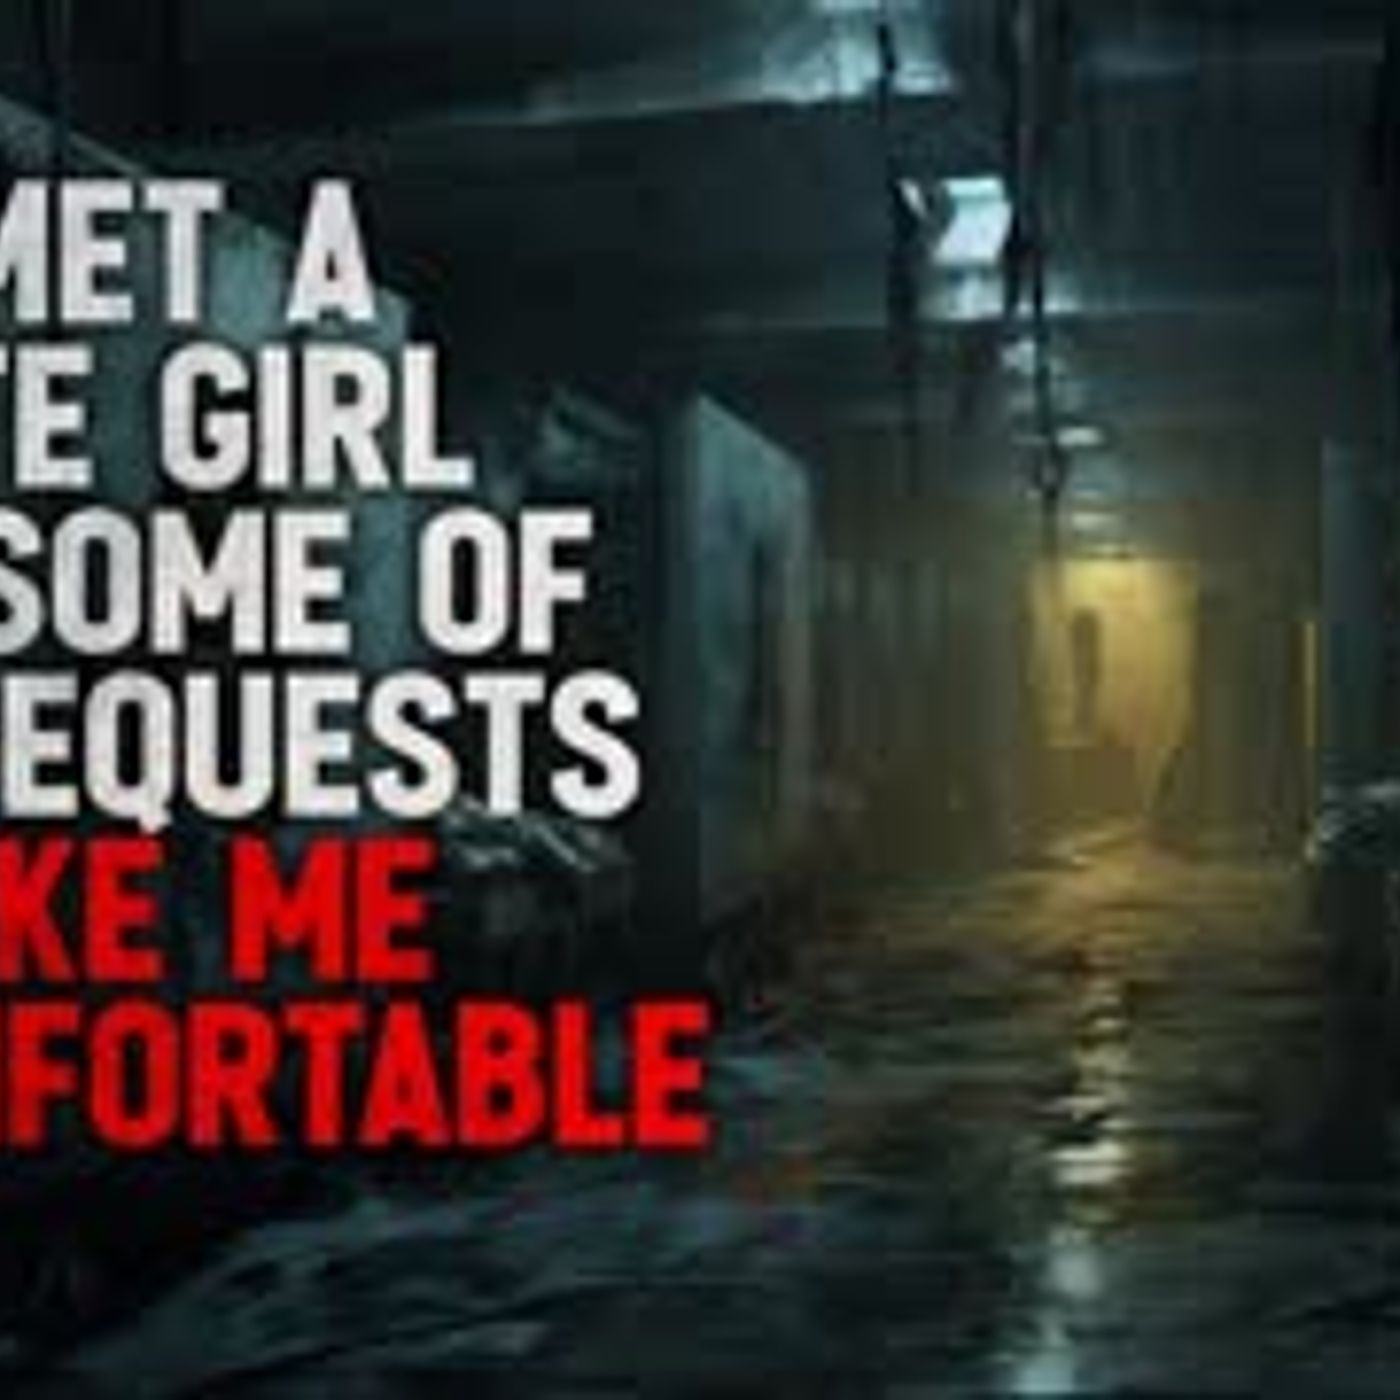 ”I met a cute girl on Tinder but some of her requests are making me uncomfortable” Creepypasta